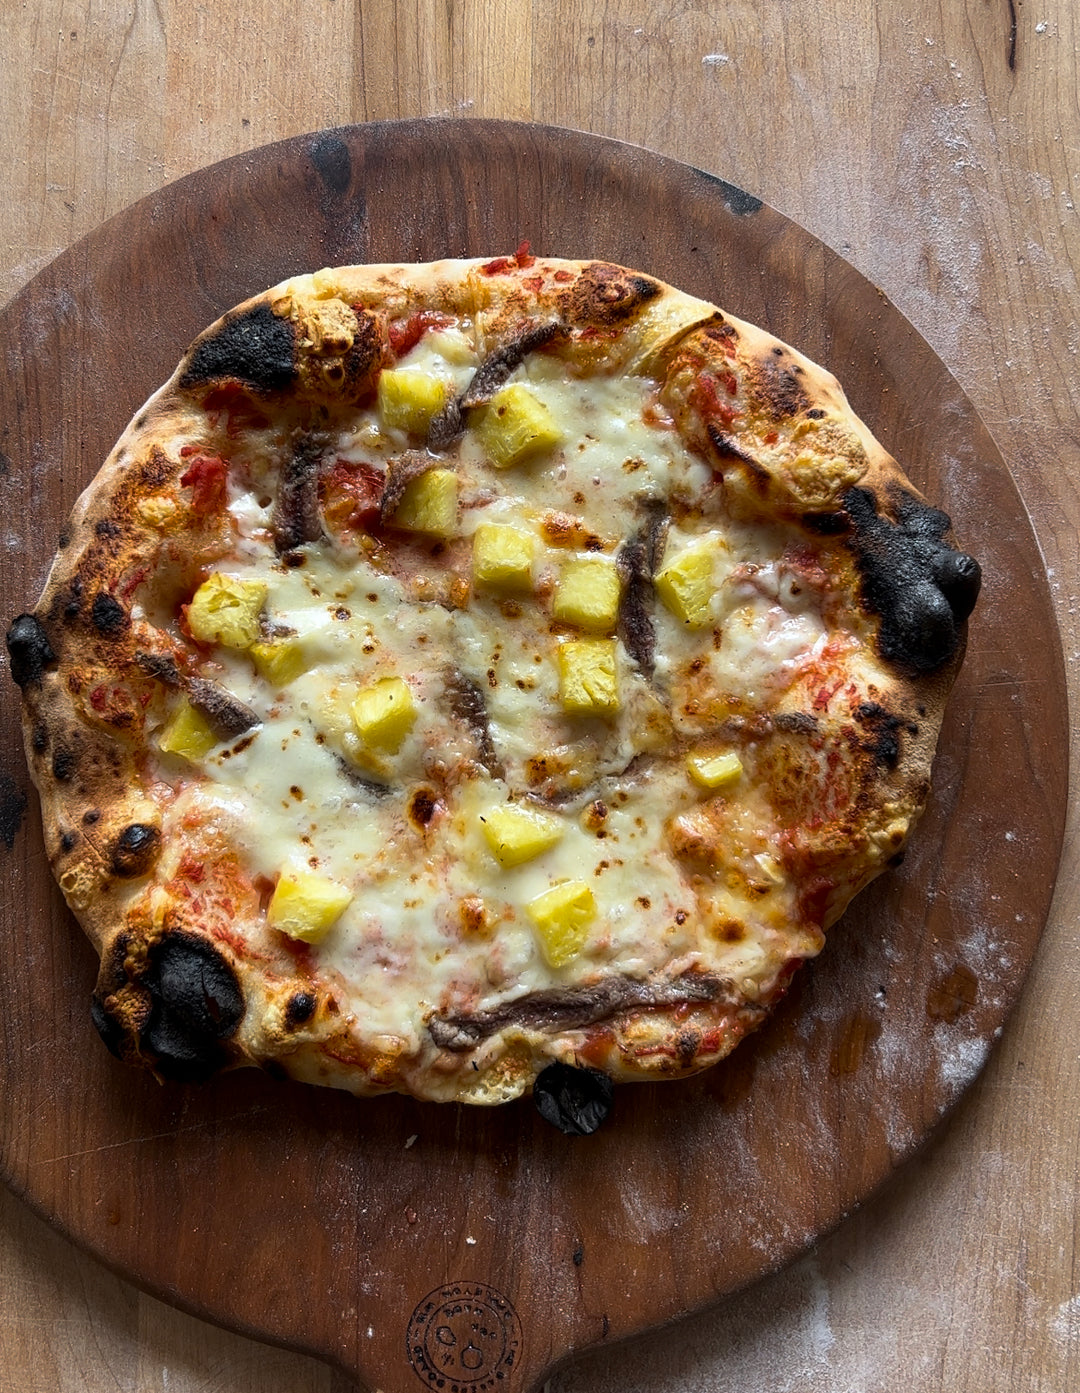 Joe Rogan Inspired Pizza: Anchovies, Pineapple, and the Spirit of Innovation